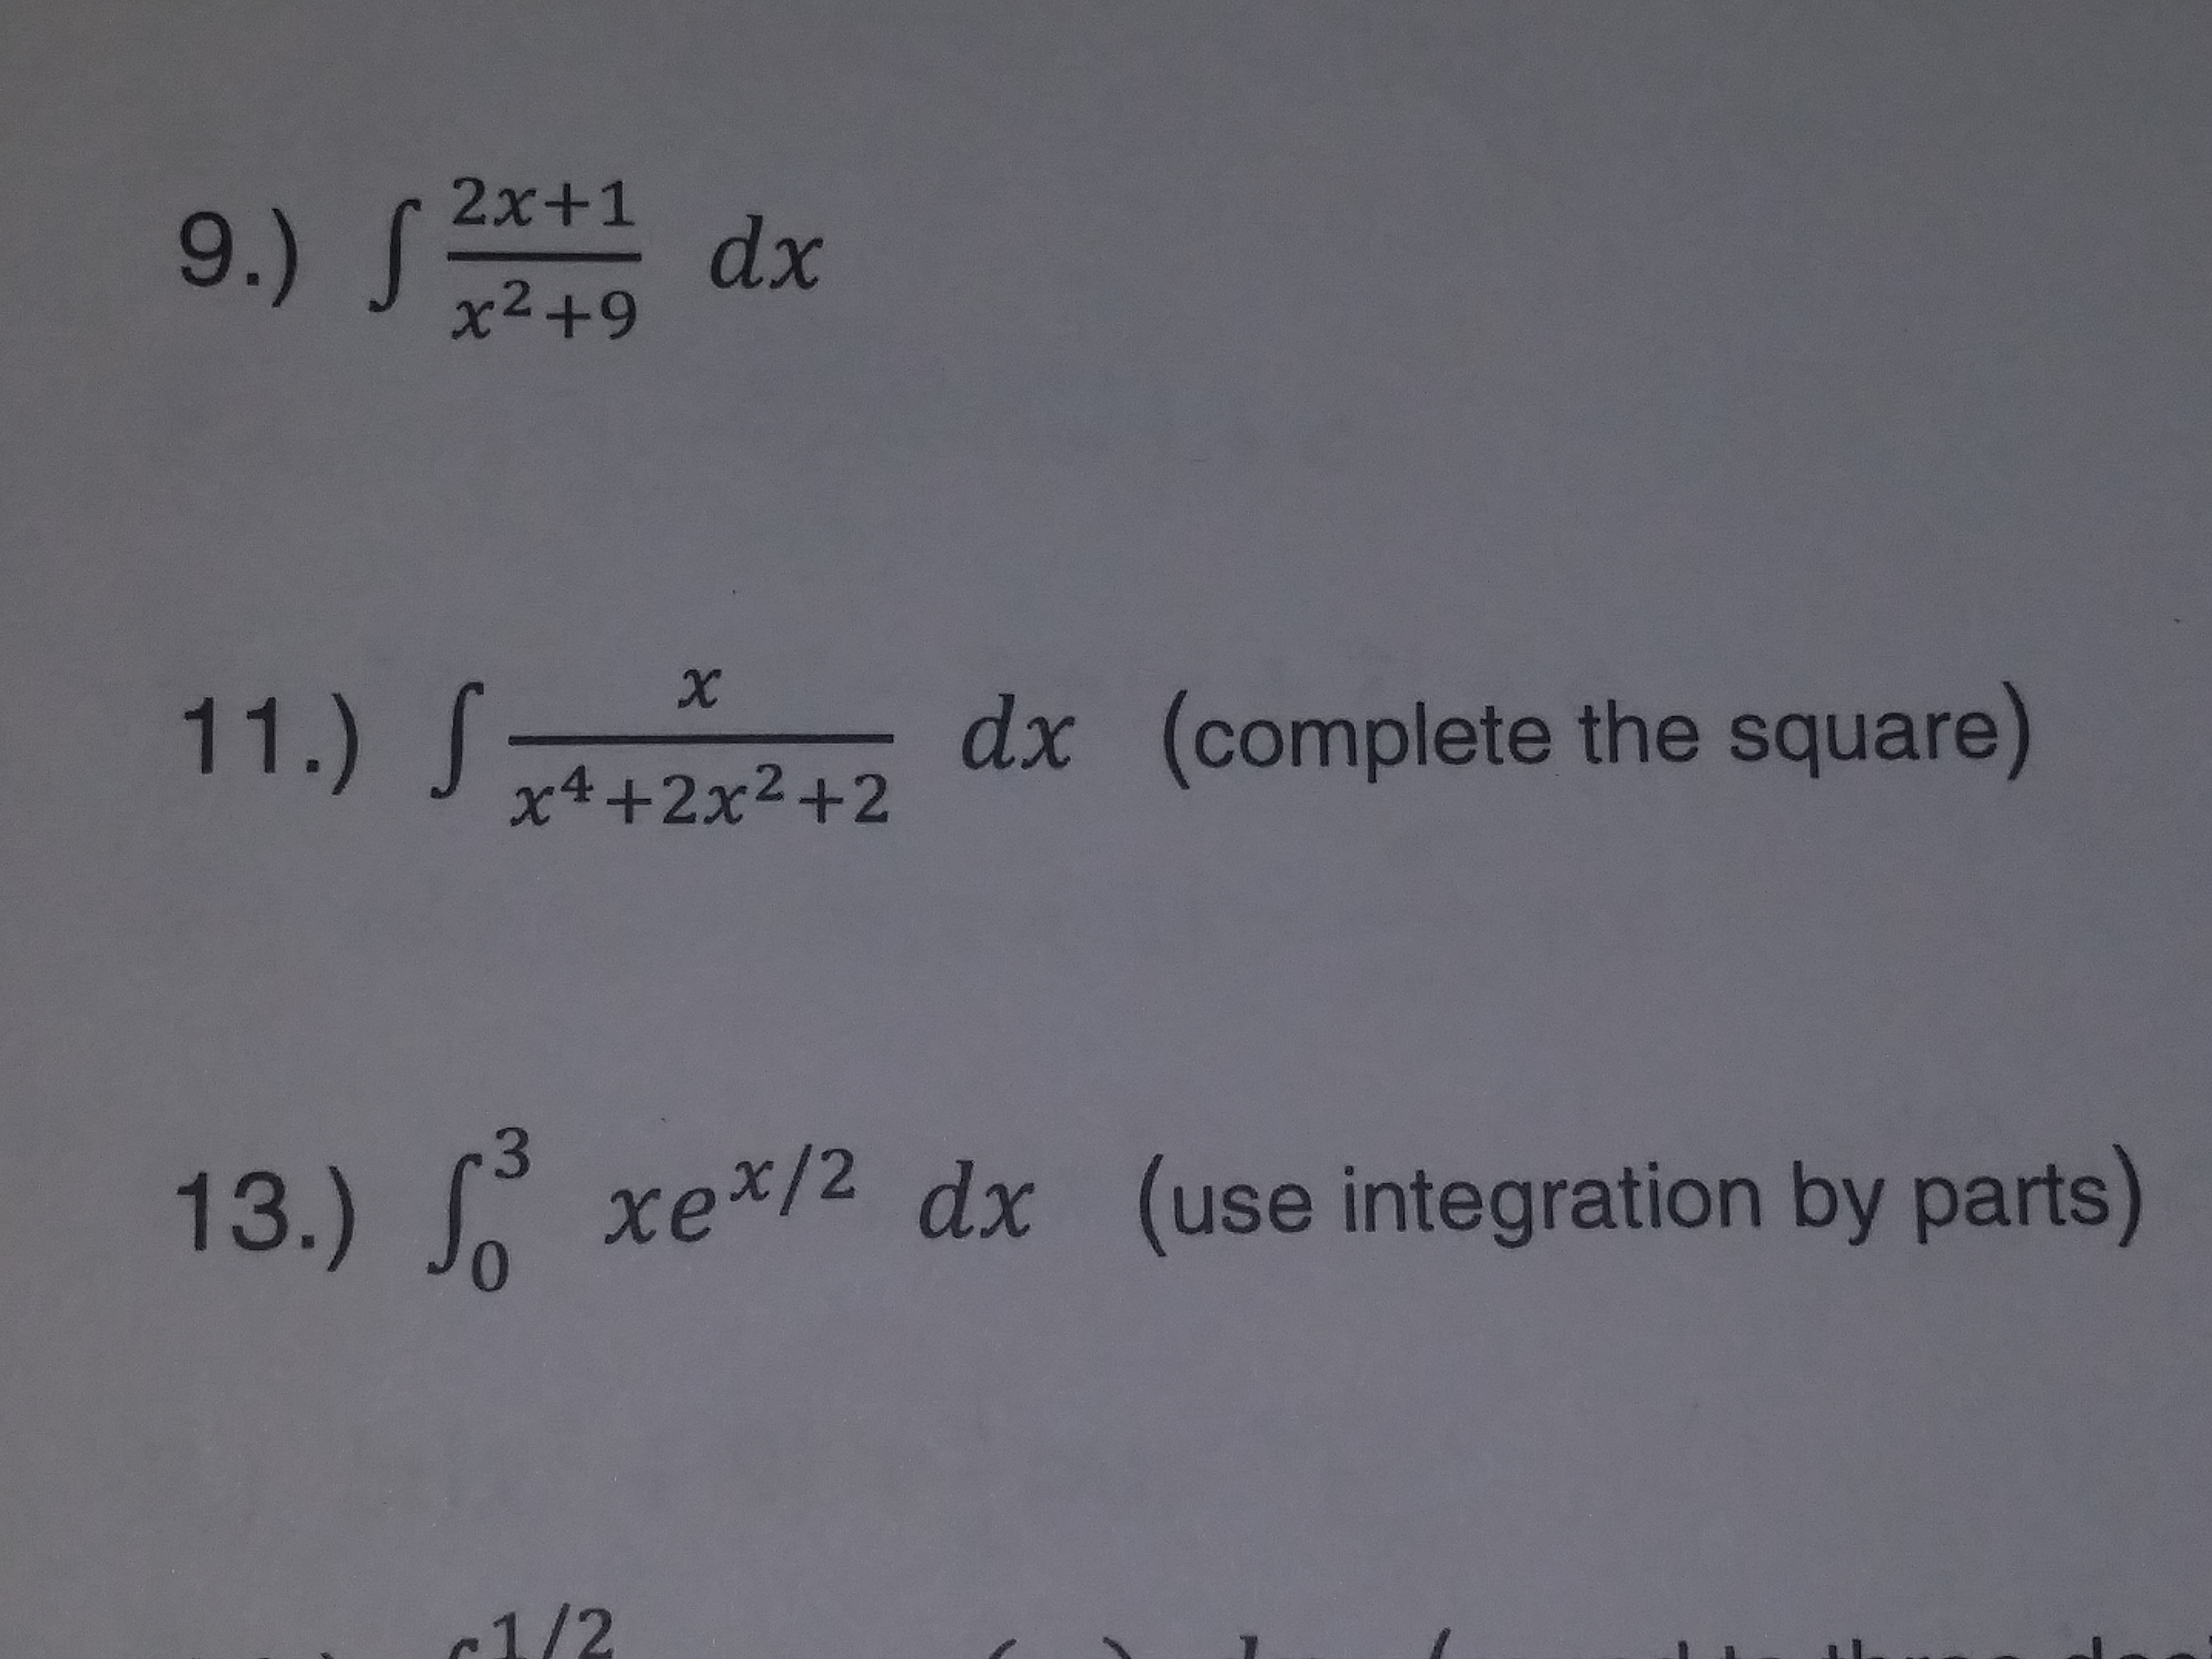 2x+1
x2+9
11.)
de (complete the square)
x4 +2x2+2
13.) fo xe*/2 dx (use integration by parts)
0
r1/2
